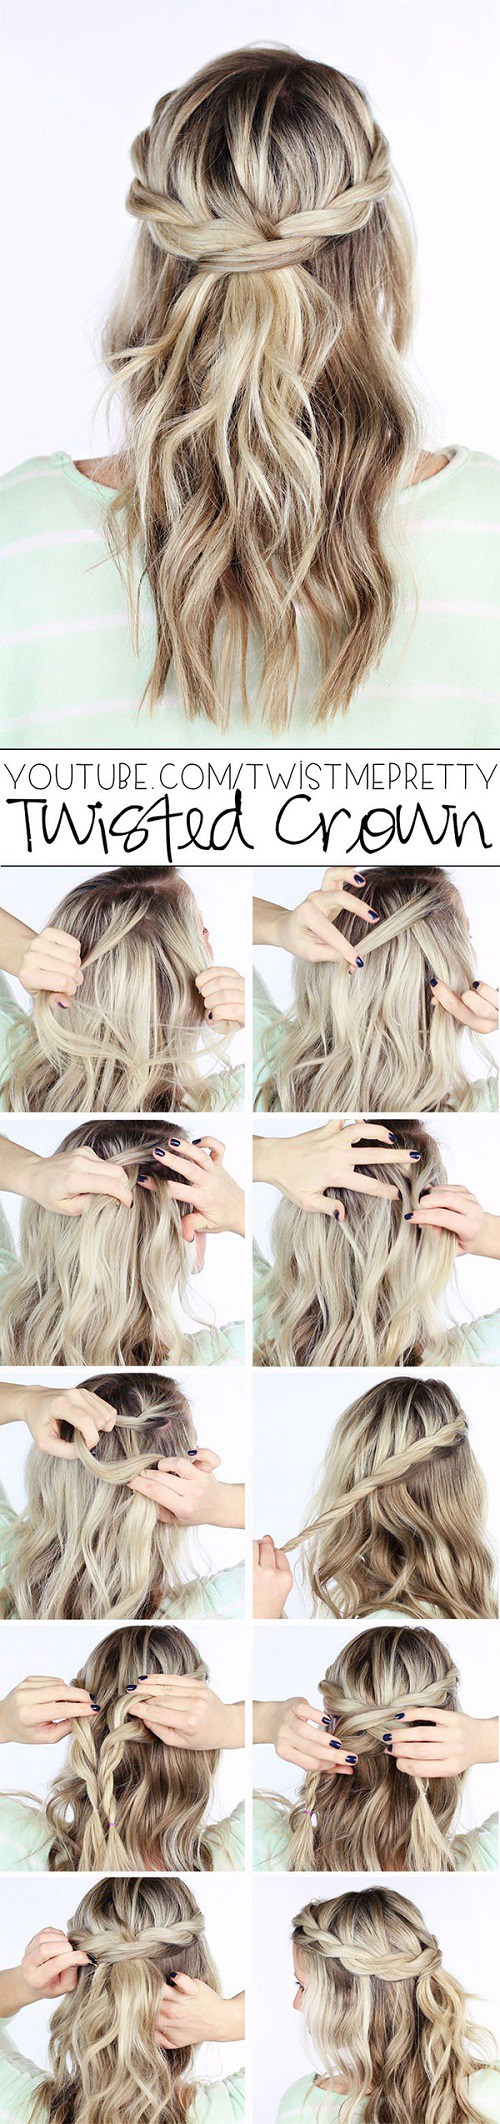 Twisted crown braid over